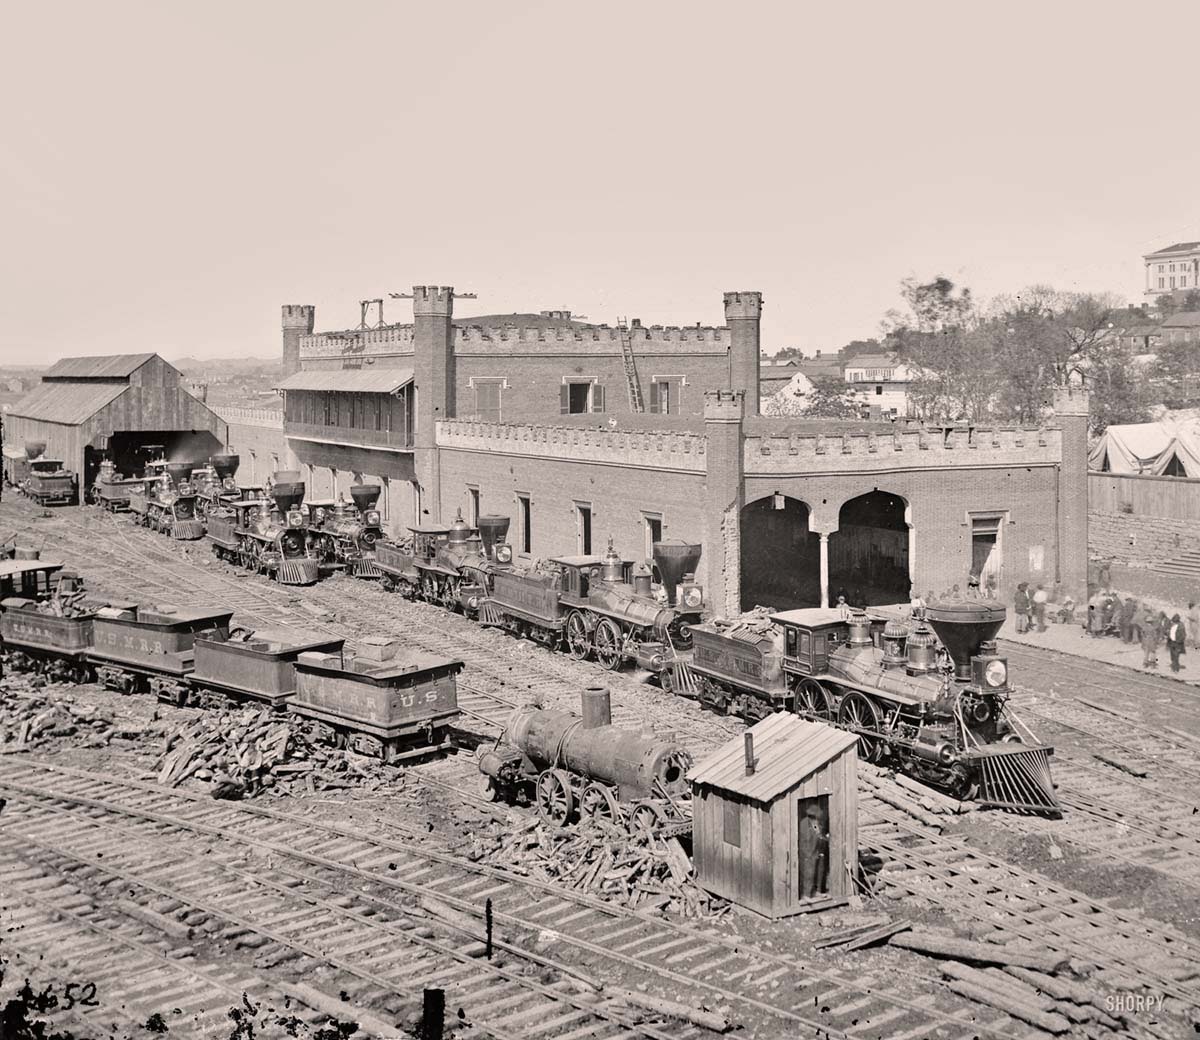 Nashville, Tennessee. Rail yard and depot with locomotives, 1864